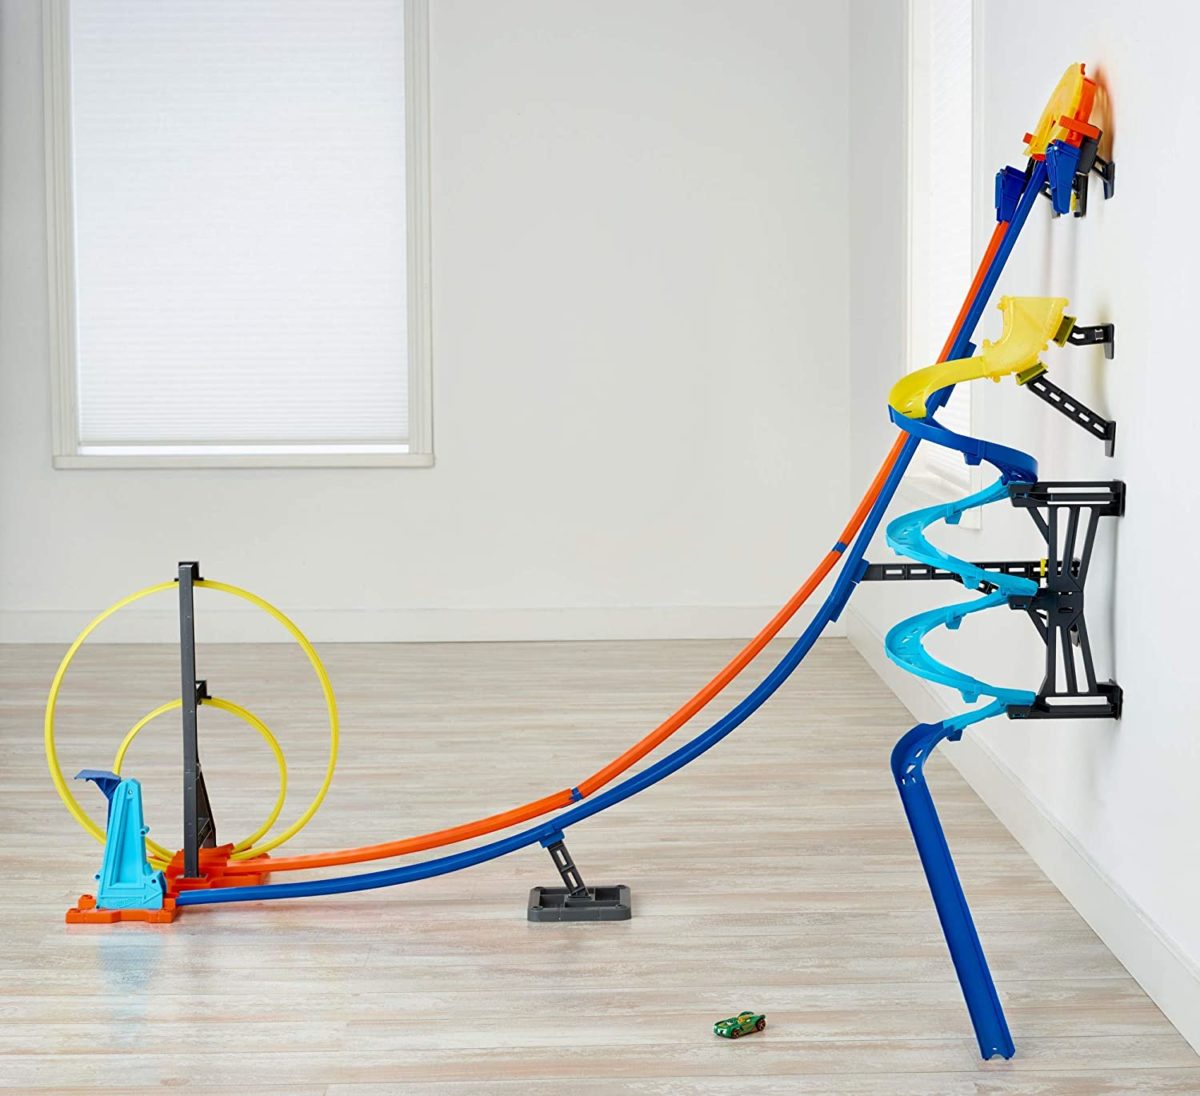 Hot Wheels Track Builder Vertical Launch Kit - Top Toys and Gifts for Eight Year Old Boys 2